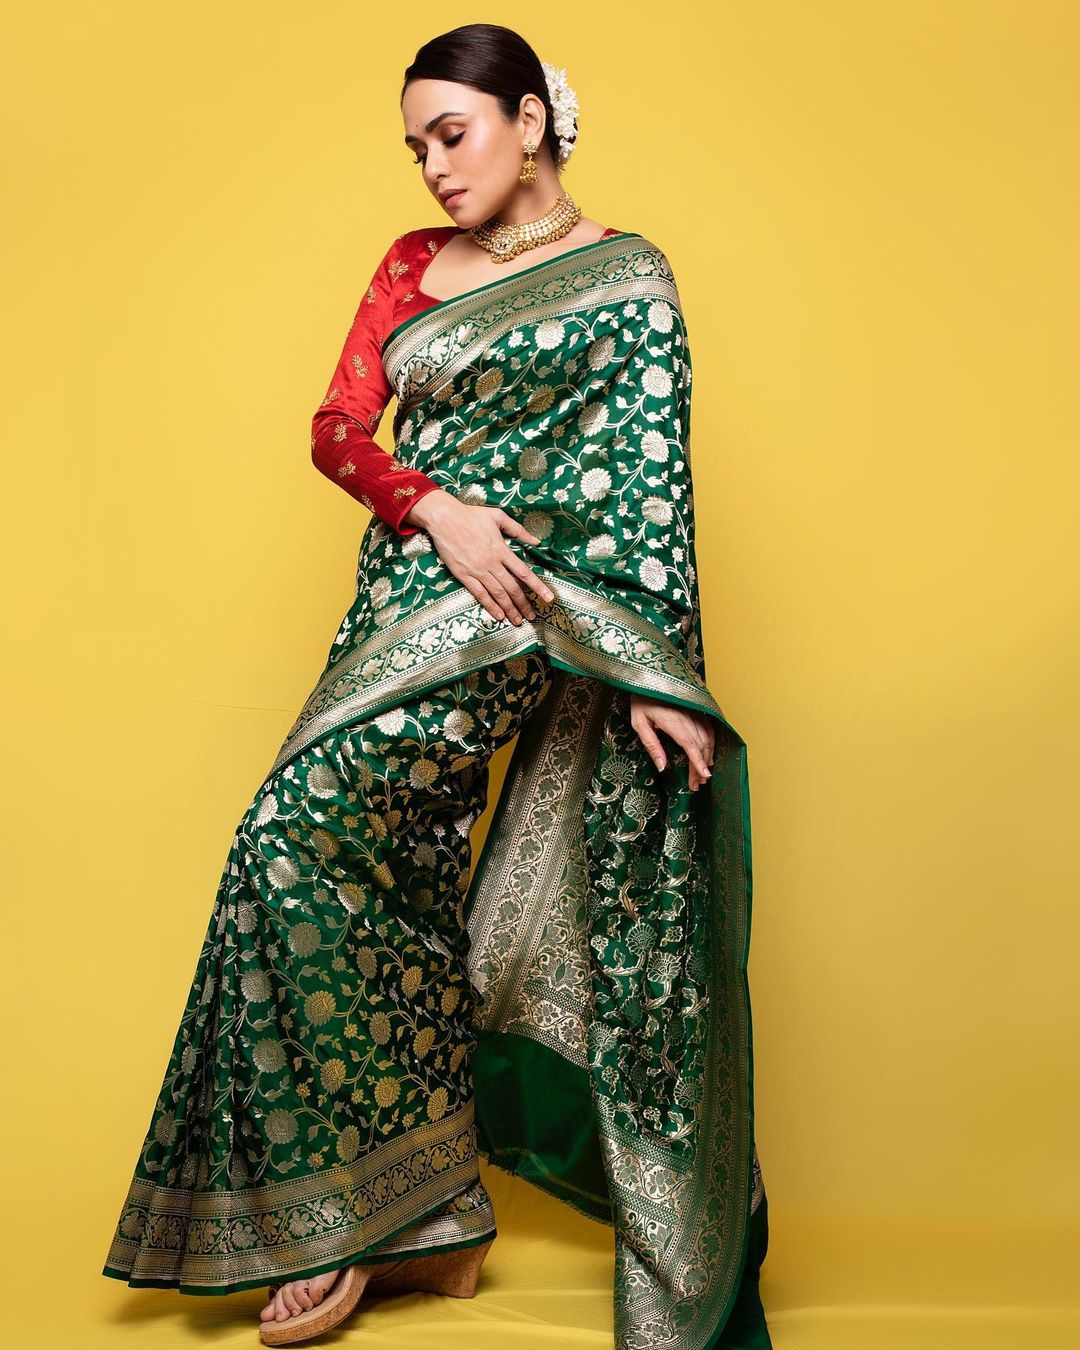 Amruta Khanvilkar In Bottle Green Saree With Maroon Blouse And Gajra Amruta Khanvilkar Inspired Outfits, Fashion And Style